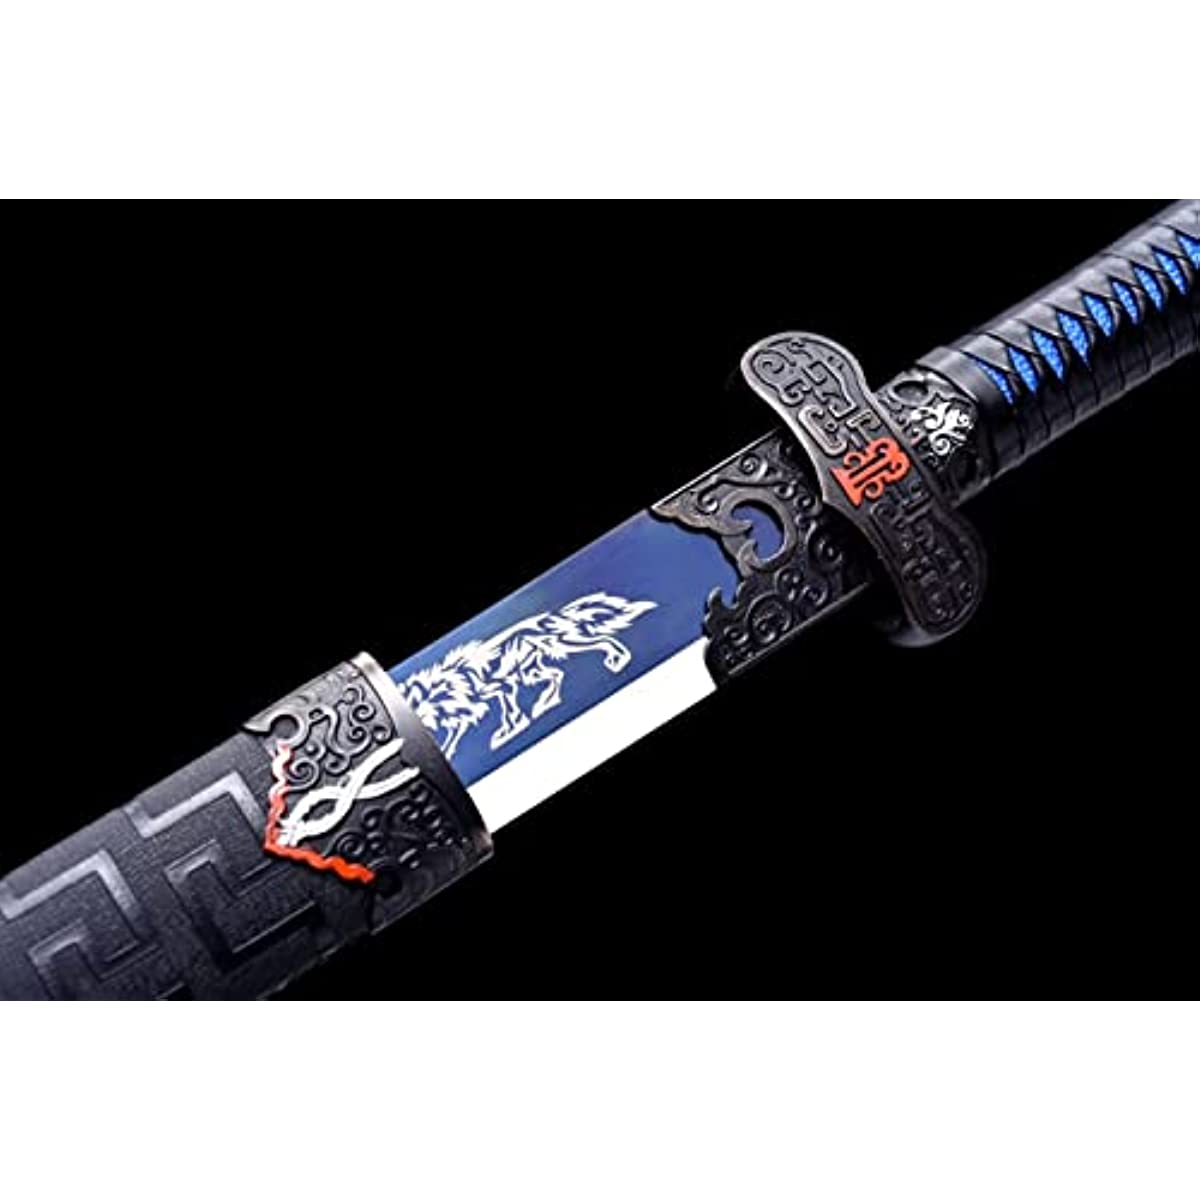 LOONGSWORD,chinese sword,Black Gold Ancient Sabre Forged High Carbon Steel Blue Blade Length 33"